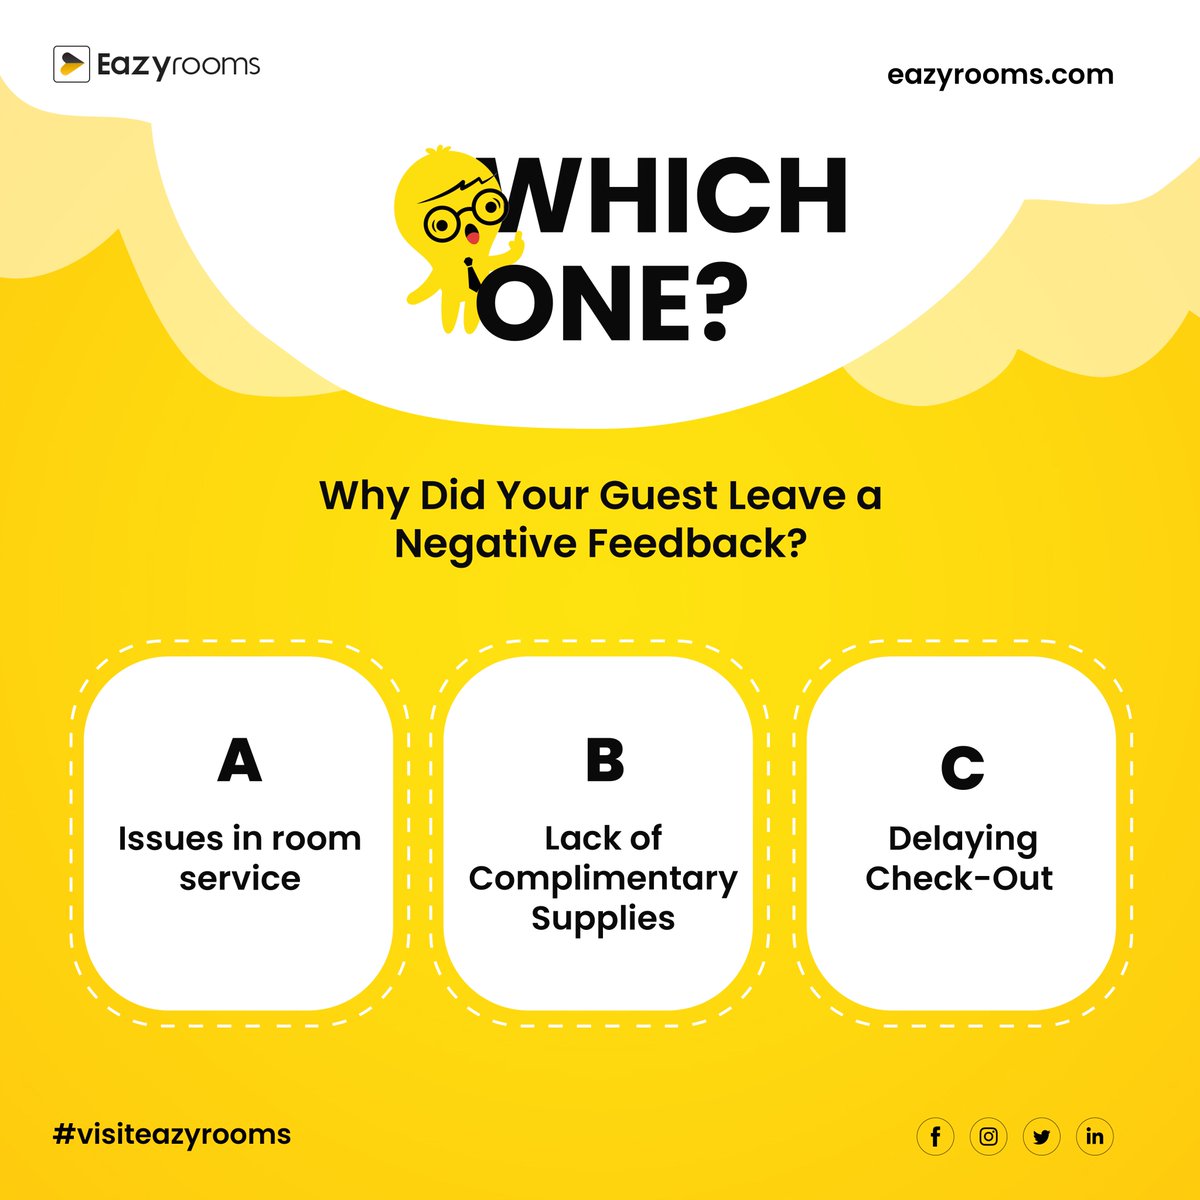 There are a few potential reasons why your guest may have left negative feedback.
A, B, or C. Share Your Thoughts Below 📝📝
.
.
.
.
#EazyRooms #Hotelmanagementsoftware #SmartRoomApp #RoomService #HotelTech #TravelTech #HotelService #HotelApplication #Hotelproblems #Hotelissues